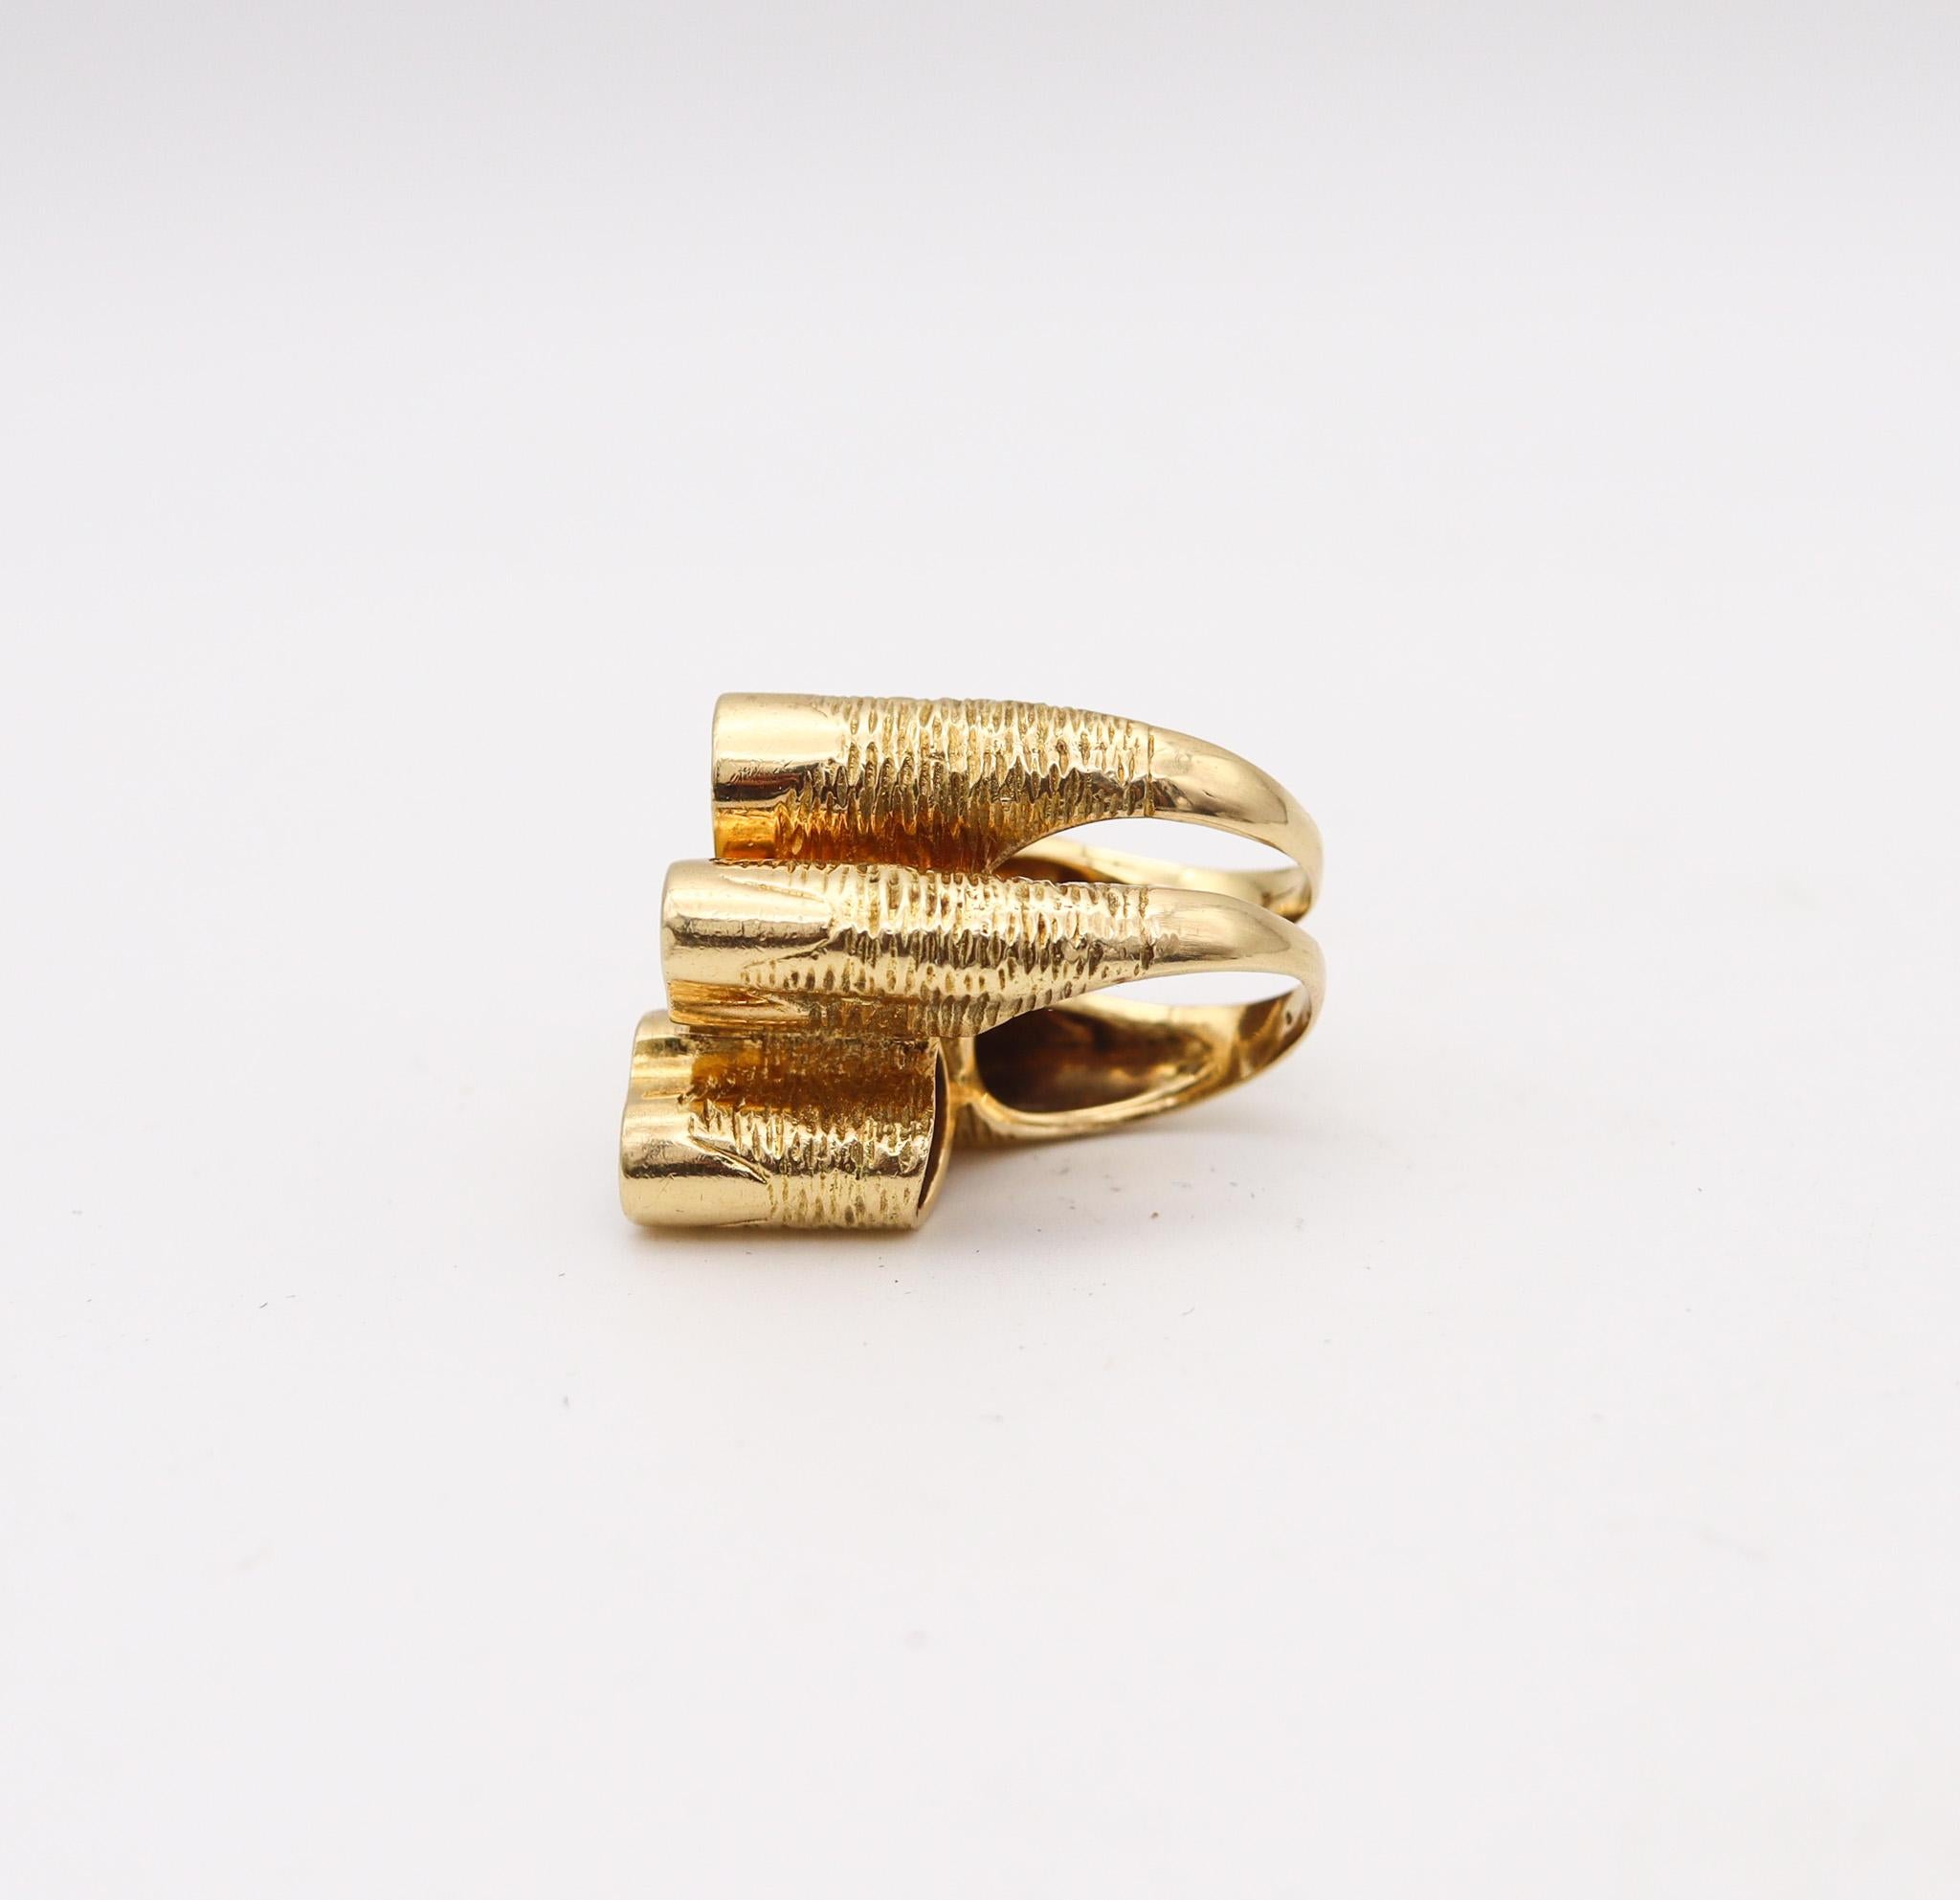 Brilliant Cut Italian Modernist 1970 Concretism Sculptural Ring In 18Kt Yellow Gold & Diamonds